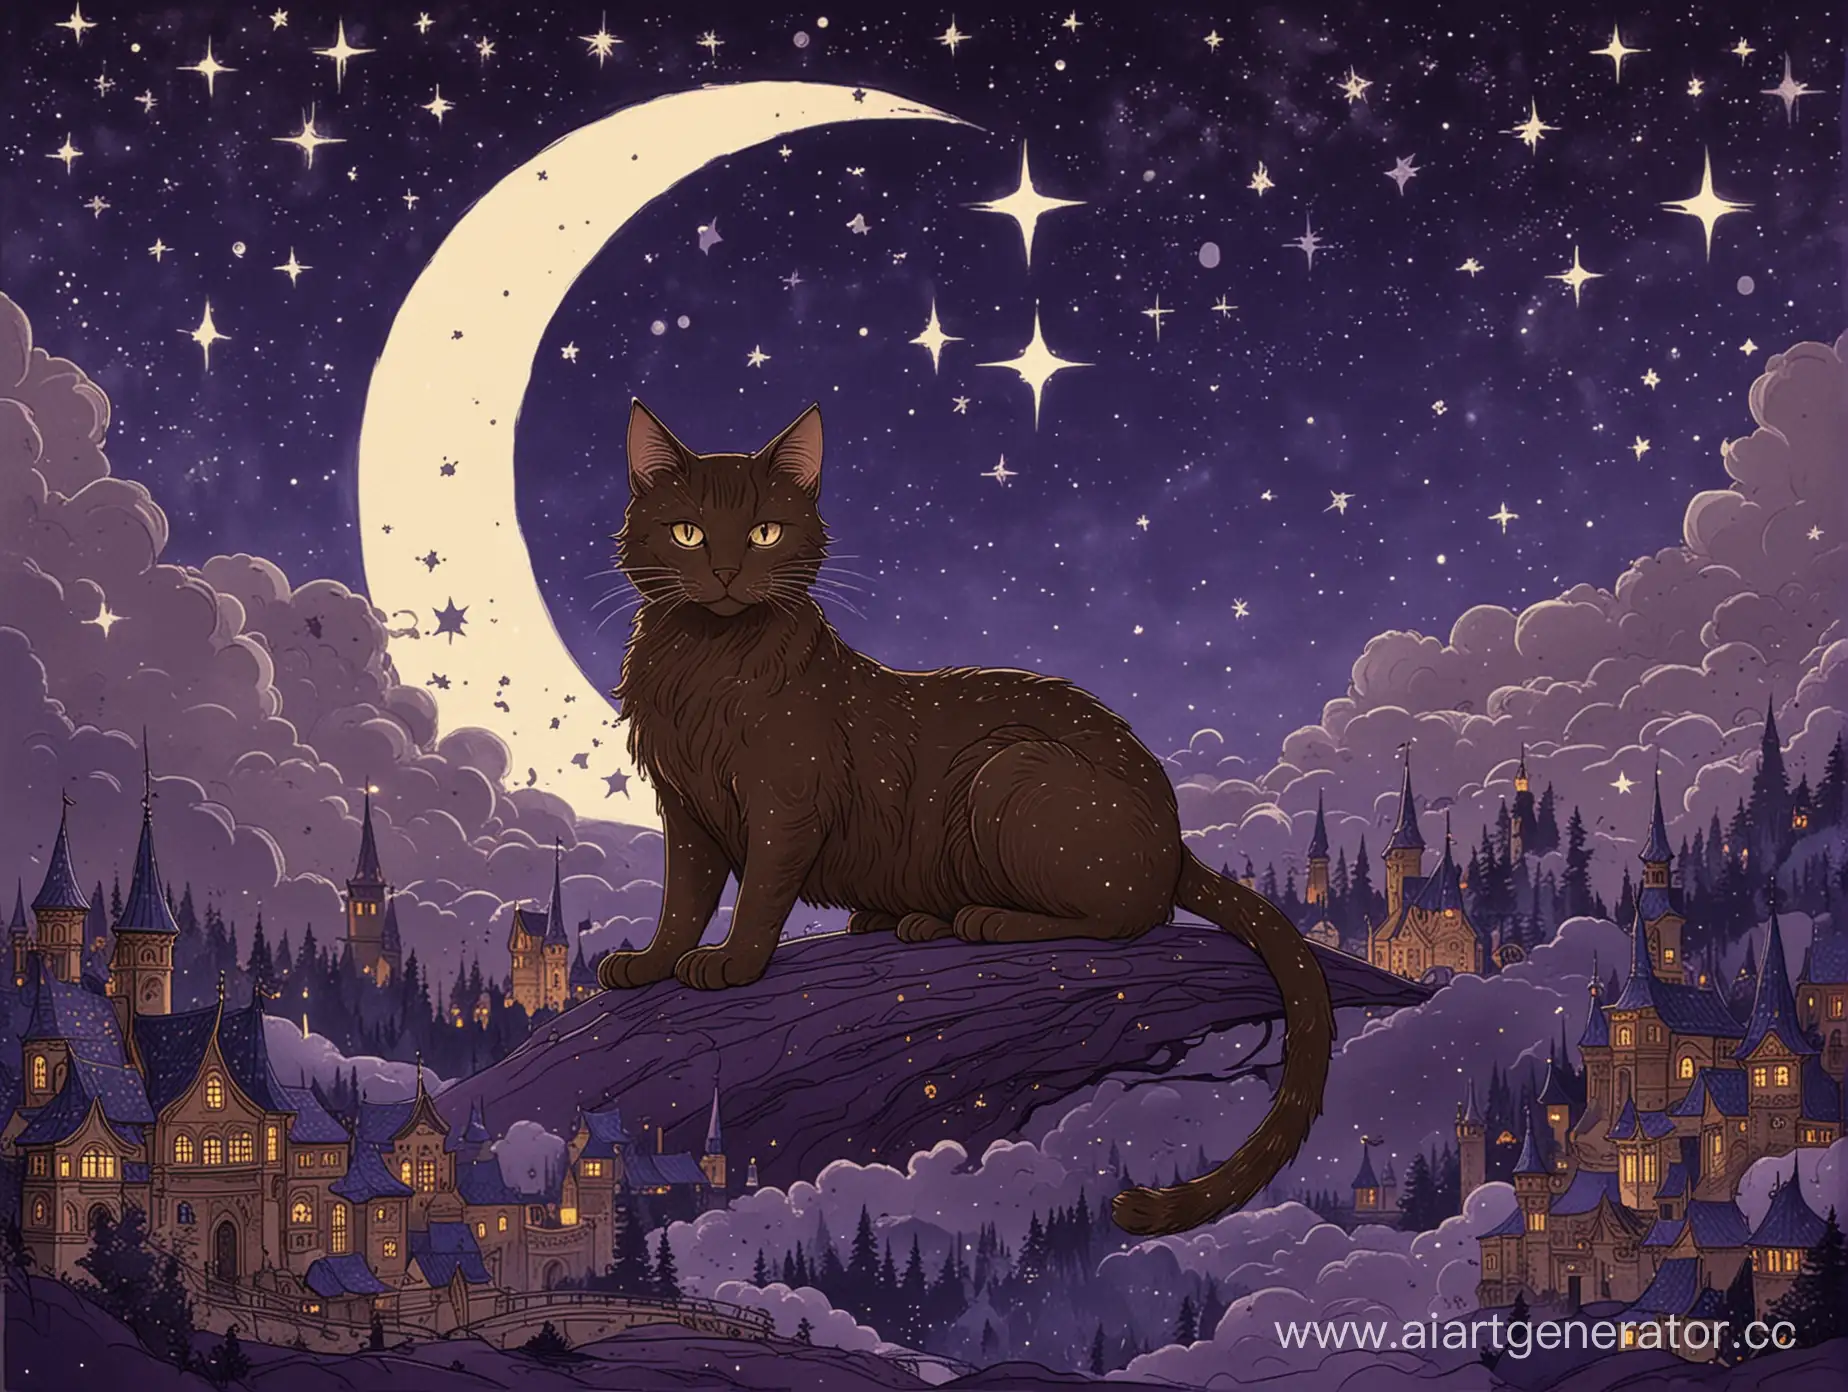 Illustration for a fairy tale in the style of Bilibin, dark purple skies full of stars, mysterious dark brown cat with crescent on the forehead